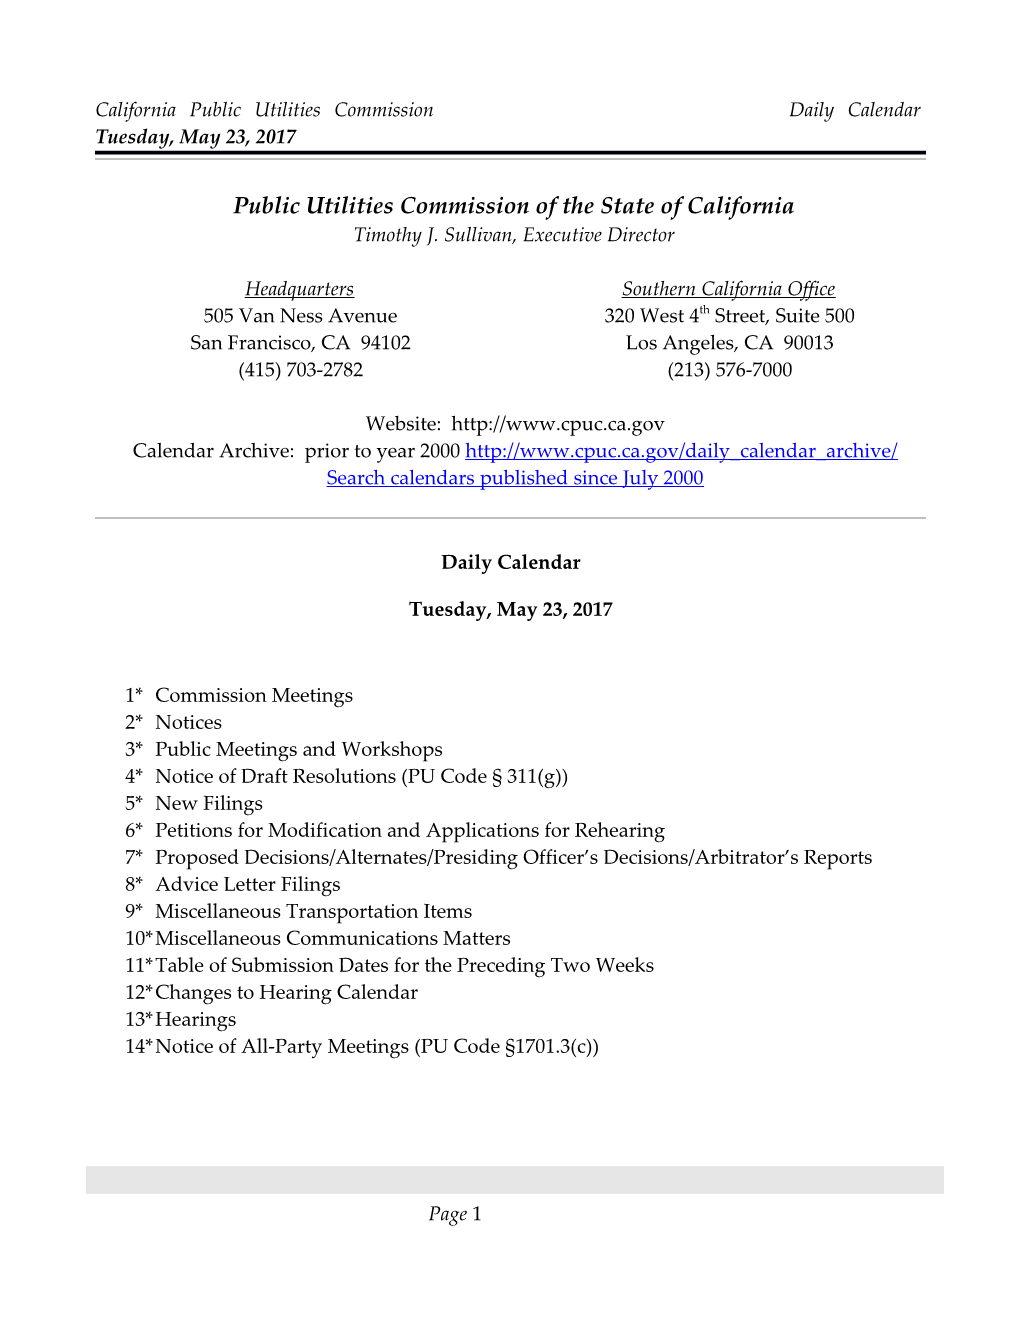 California Public Utilities Commission Daily Calendar Tuesday, May 23, 2017